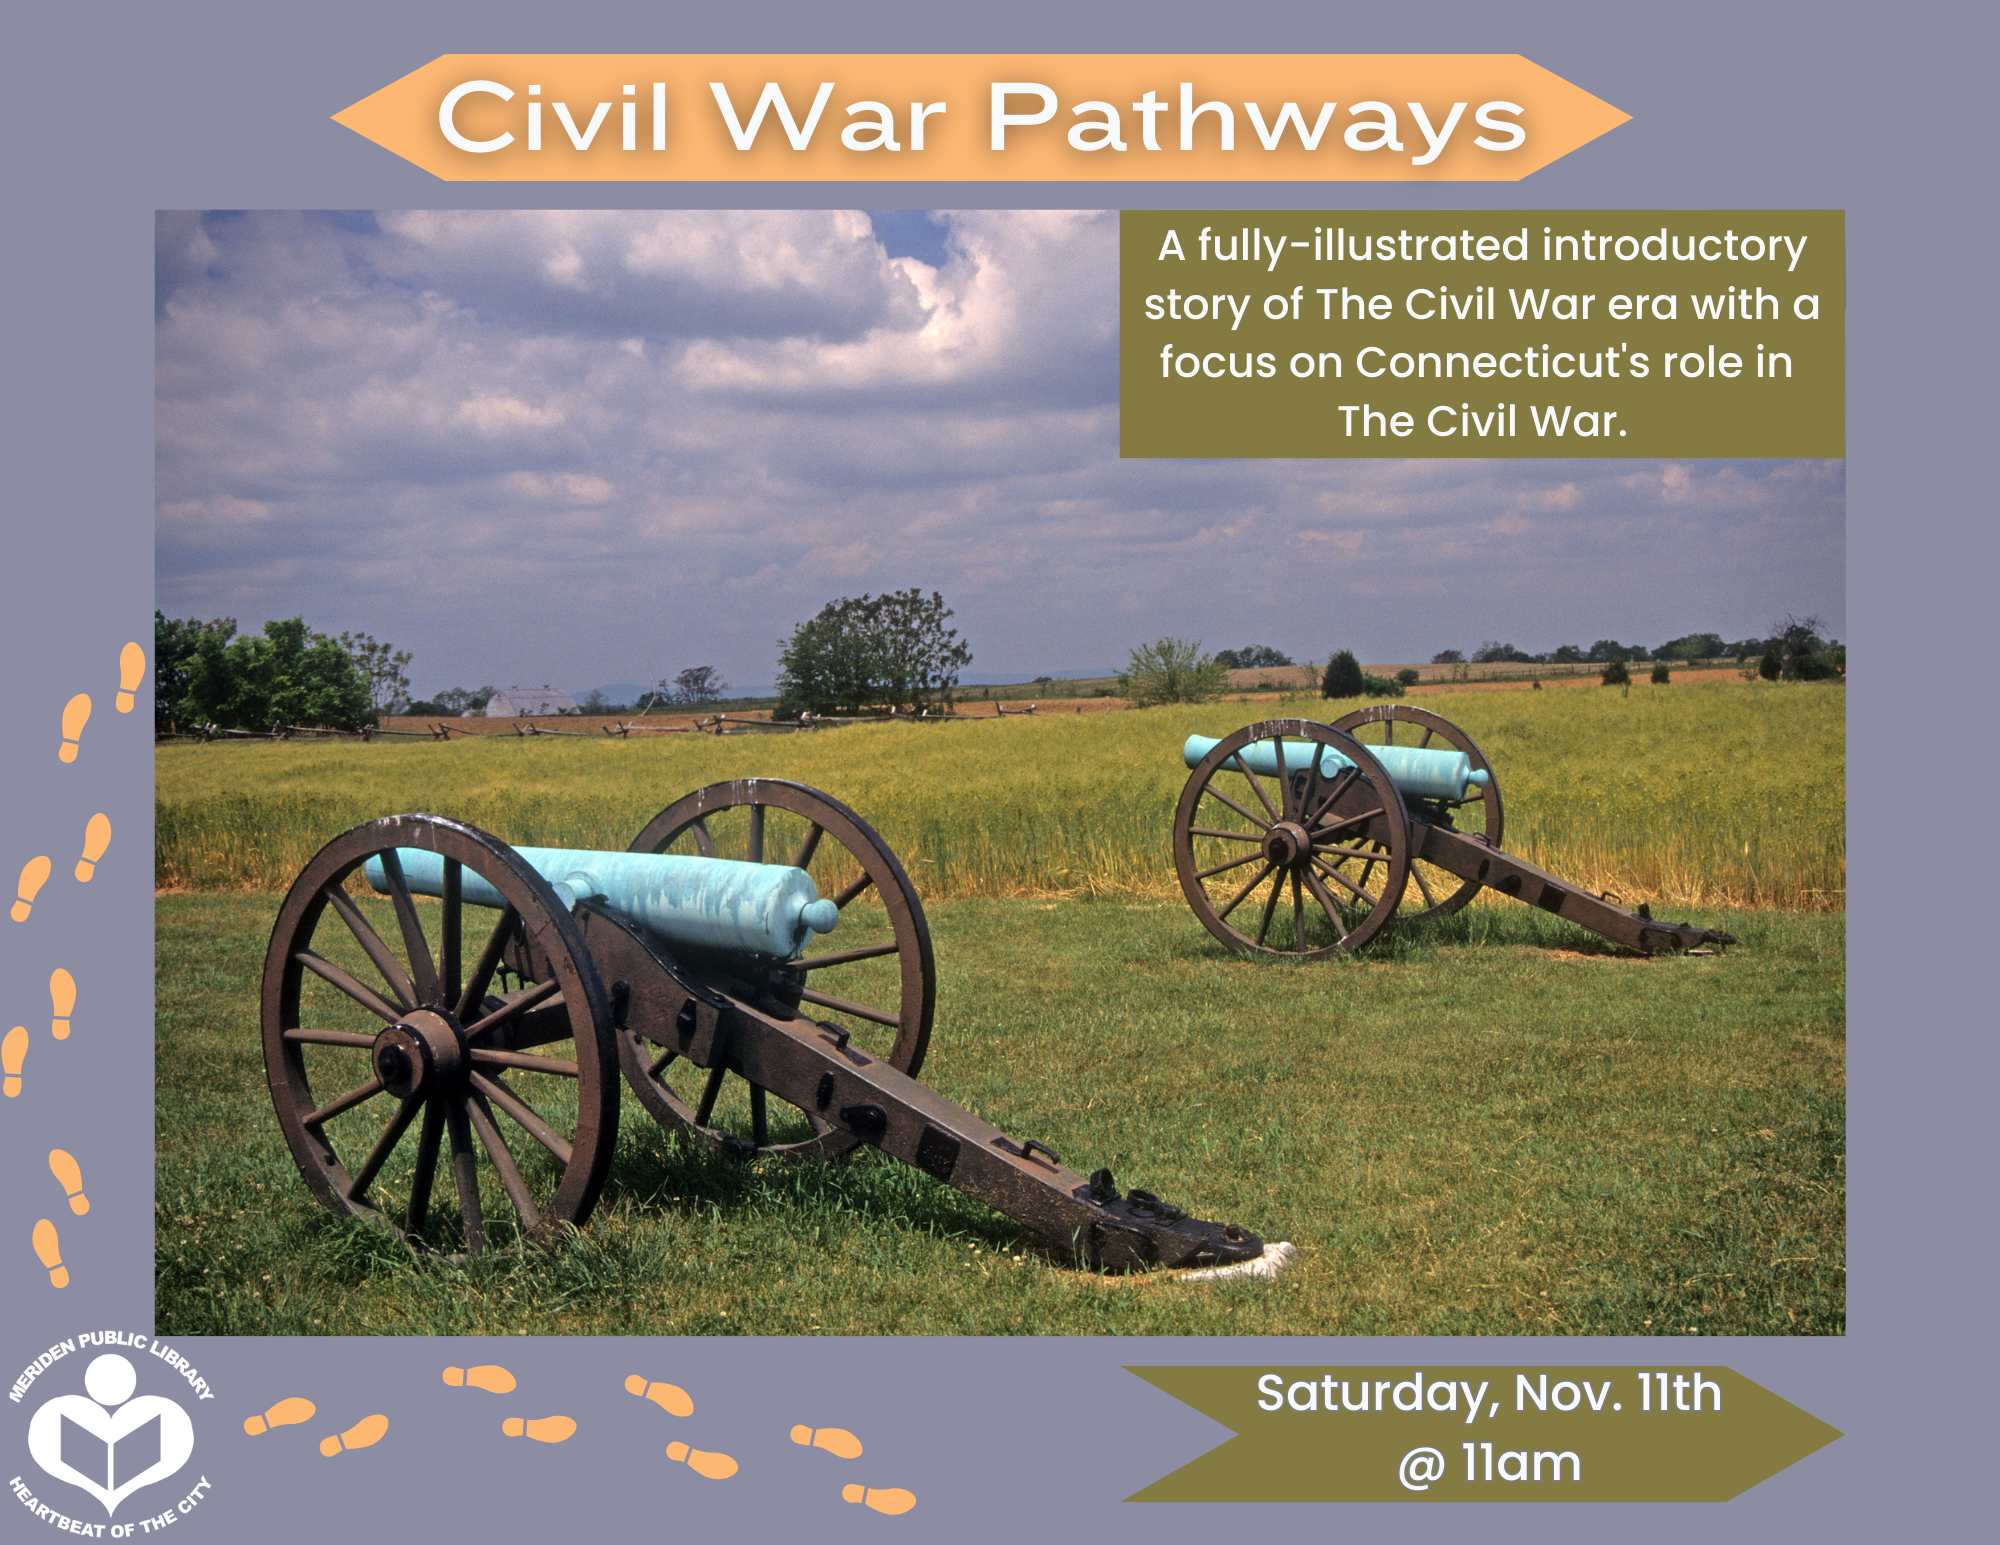 Picture of civil war cannons in battlefield with the title "Civil War Pathways" above and the date Saturday, November 11 at 11 am in the bottom right corner.